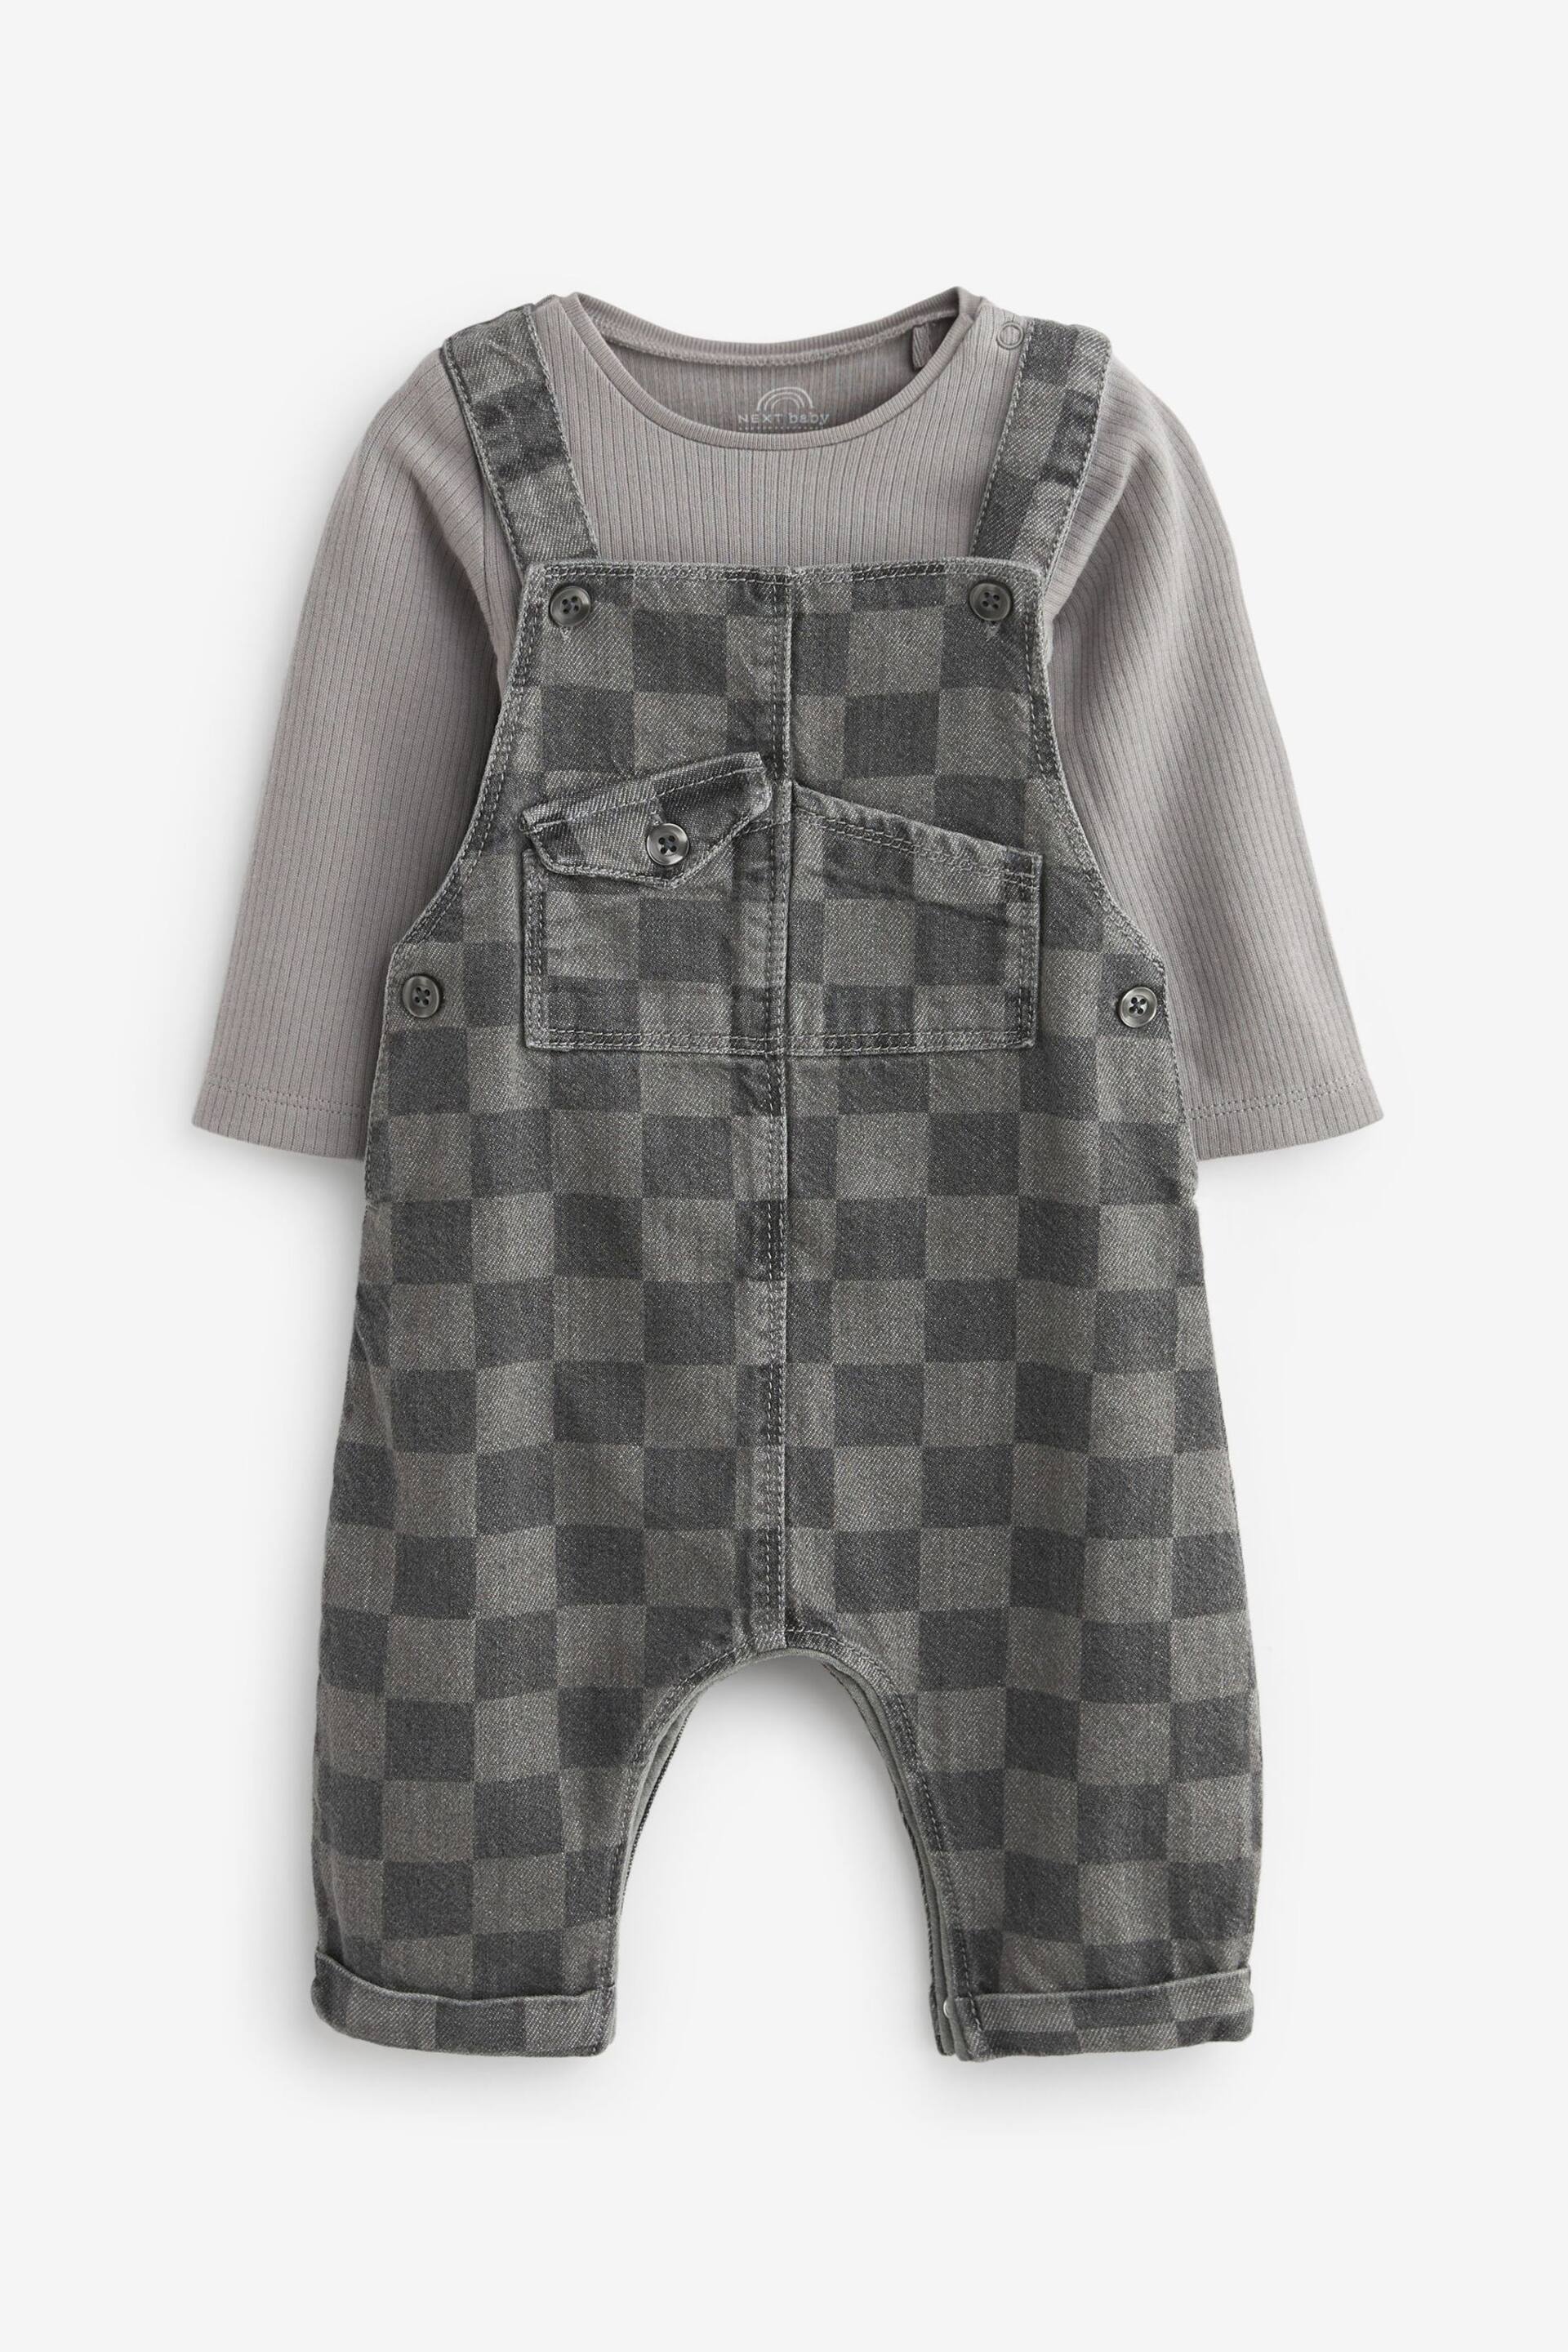 Monochrome Check Baby Denim Dungarees And Bodysuit Set (0mths-2yrs) - Image 4 of 7